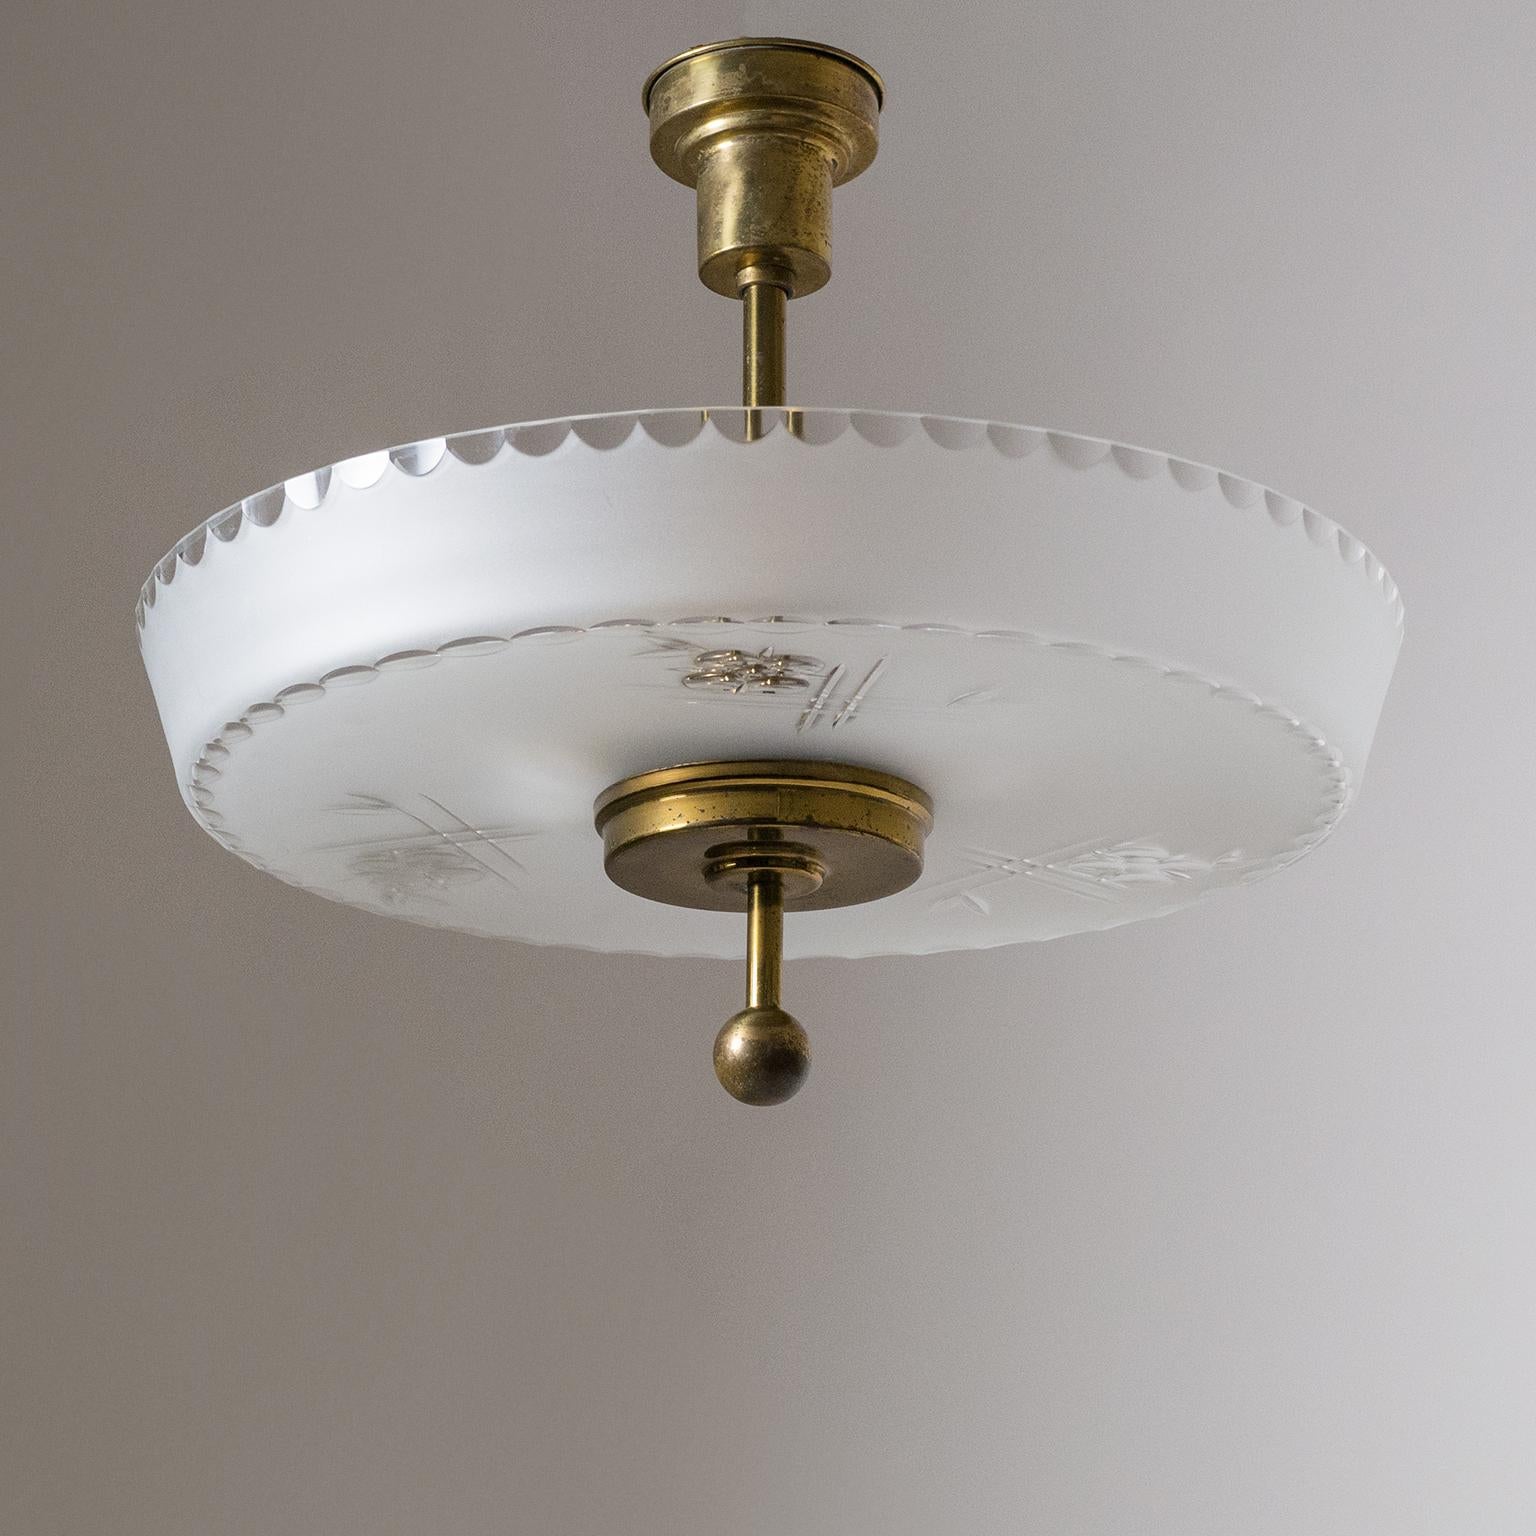 Rare Art Deco ceiling light, circa 1930. Attached to all-brass hardware is a large blown glass diffuser with a satin finish and clear cut ornamentation. Very nice original condition with a nicely aged patina on the brass. Two original brass E27